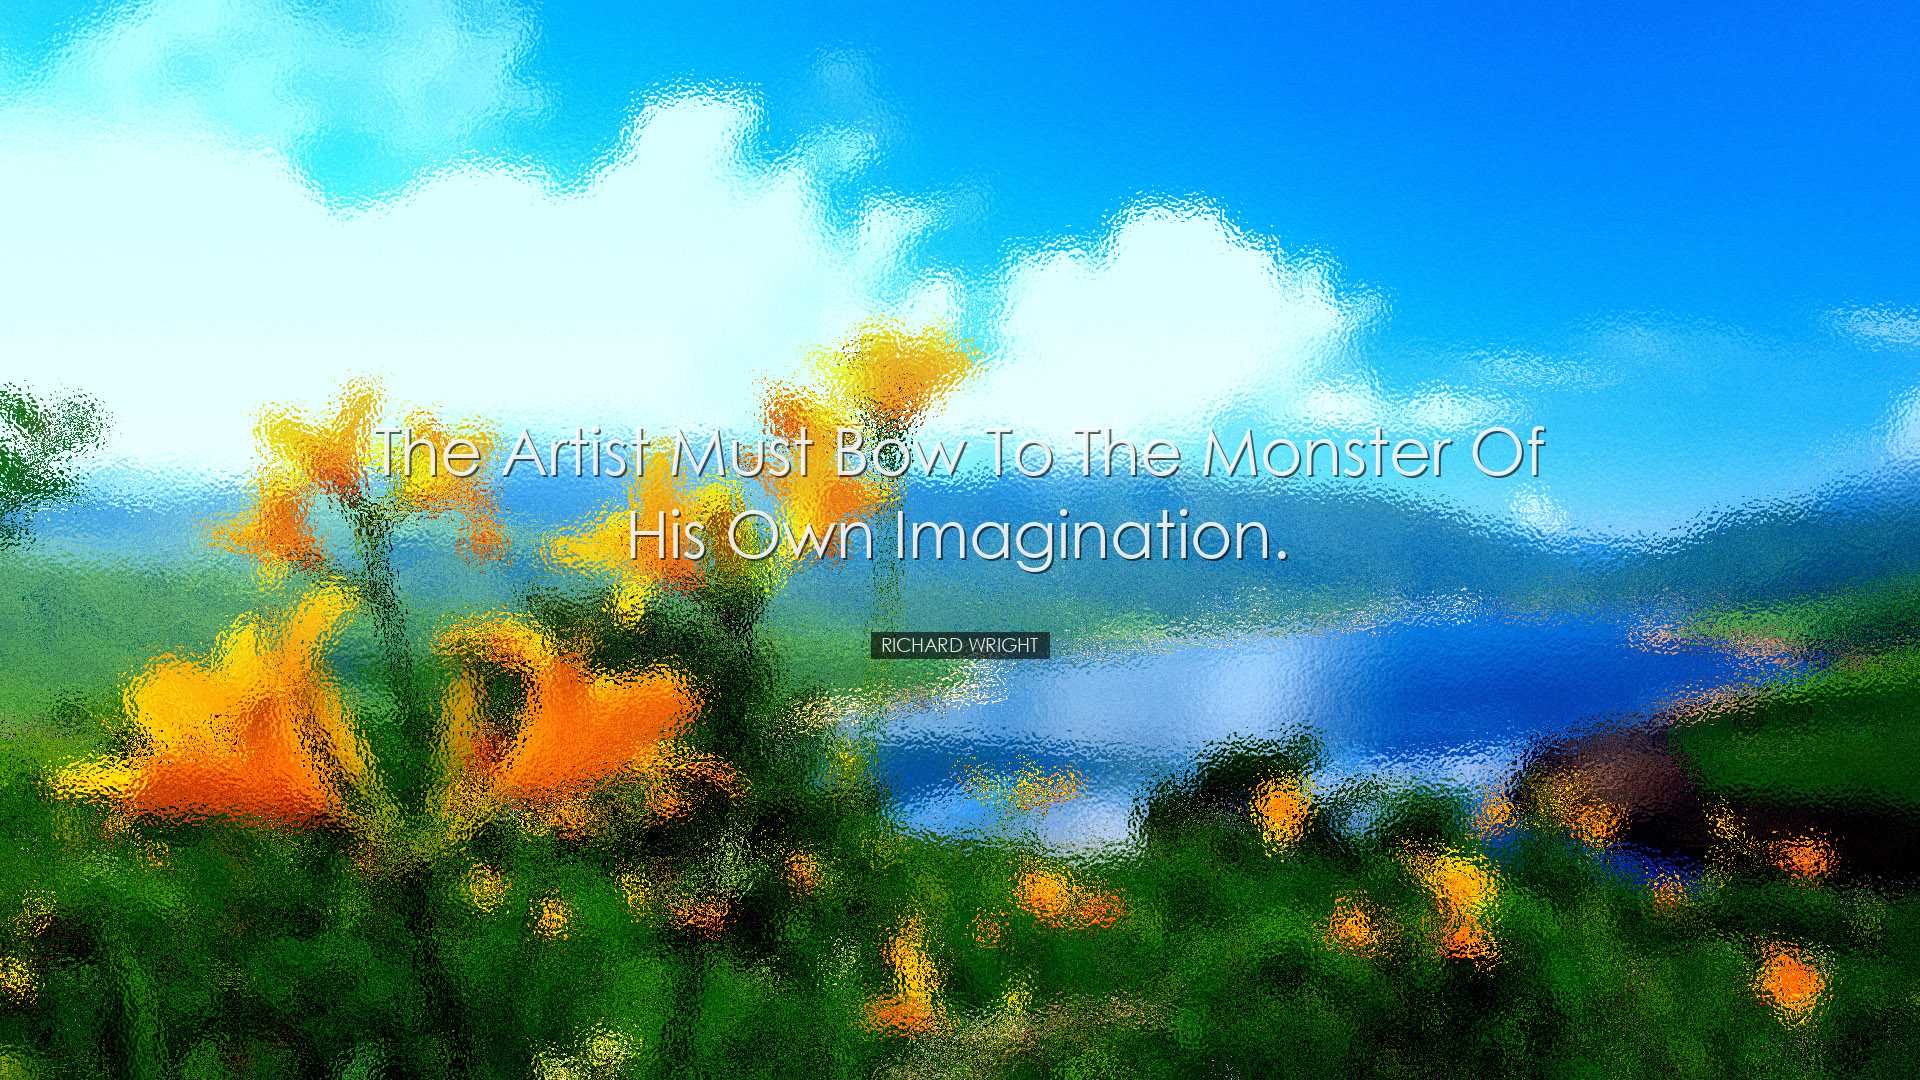 The artist must bow to the monster of his own imagination. - Richa